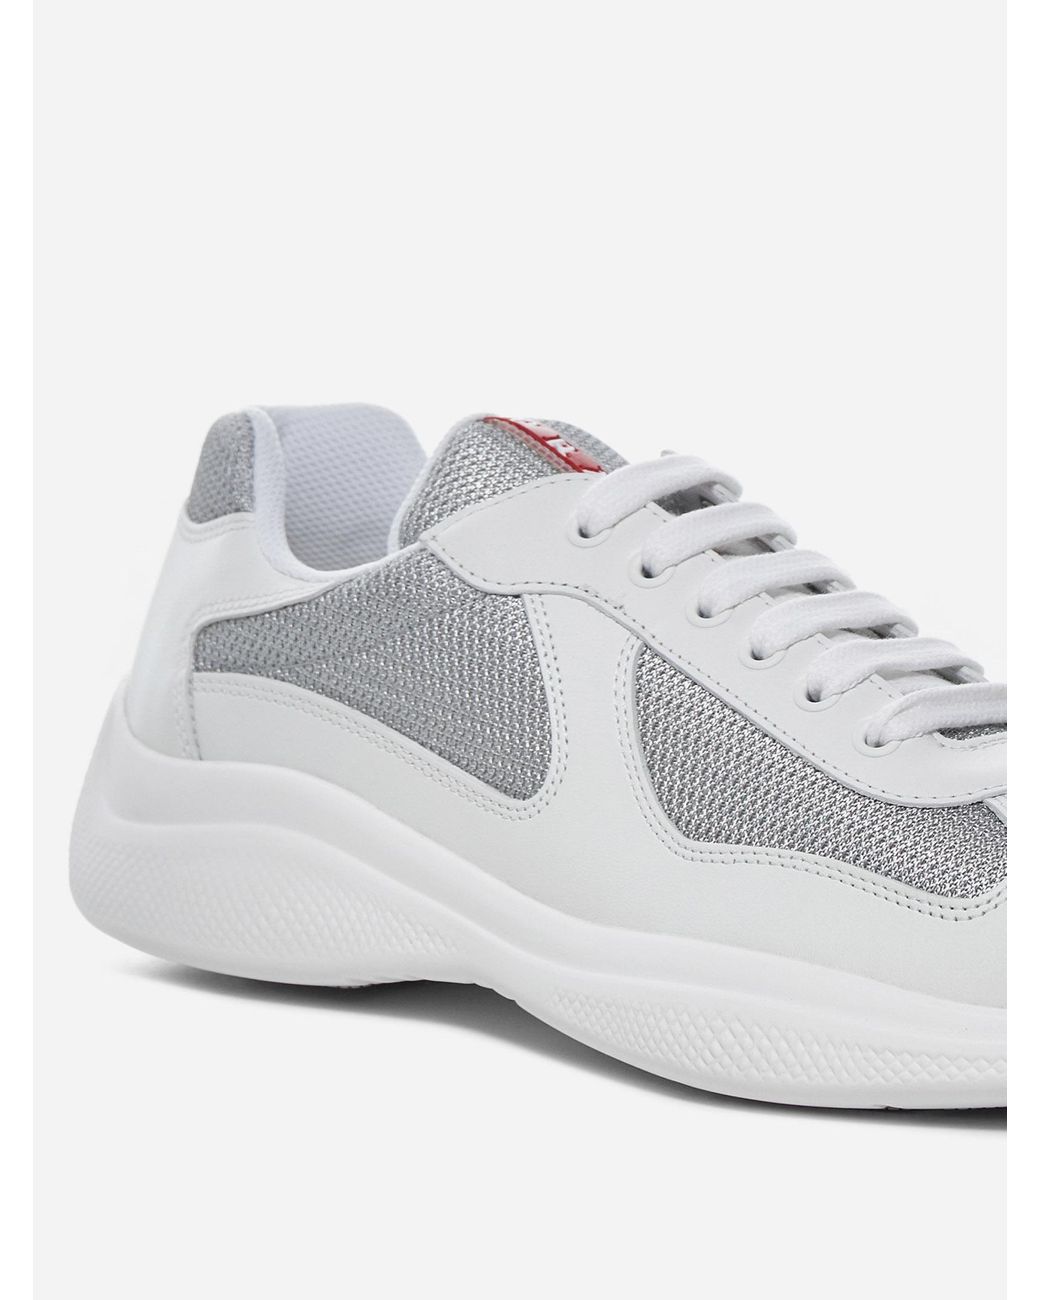 Kanon water domein Prada America's Cup Leather And Fabric Sneakers in White | Lyst